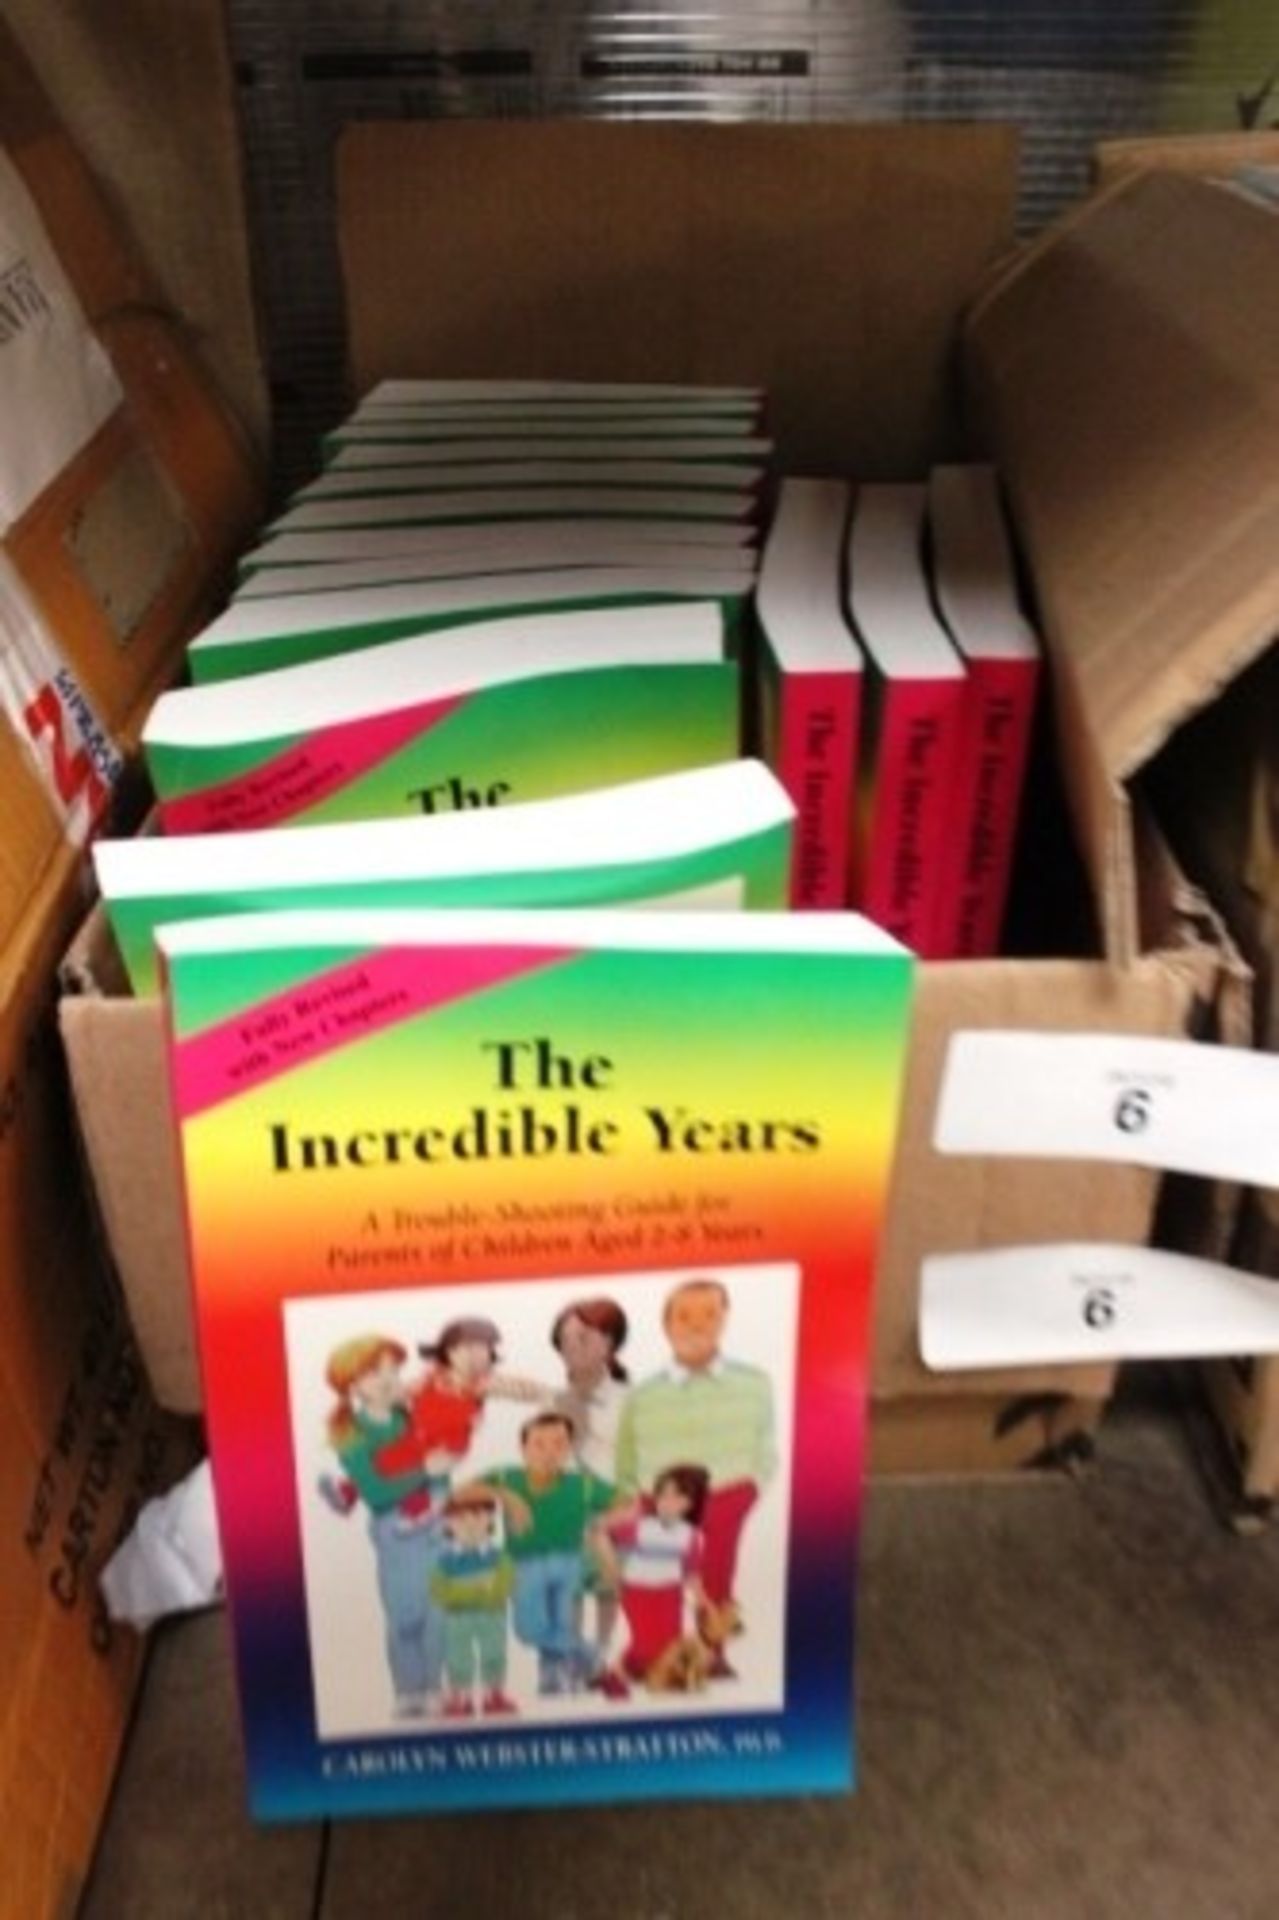 15 x copies of The Incredible Years - Second hand (25)